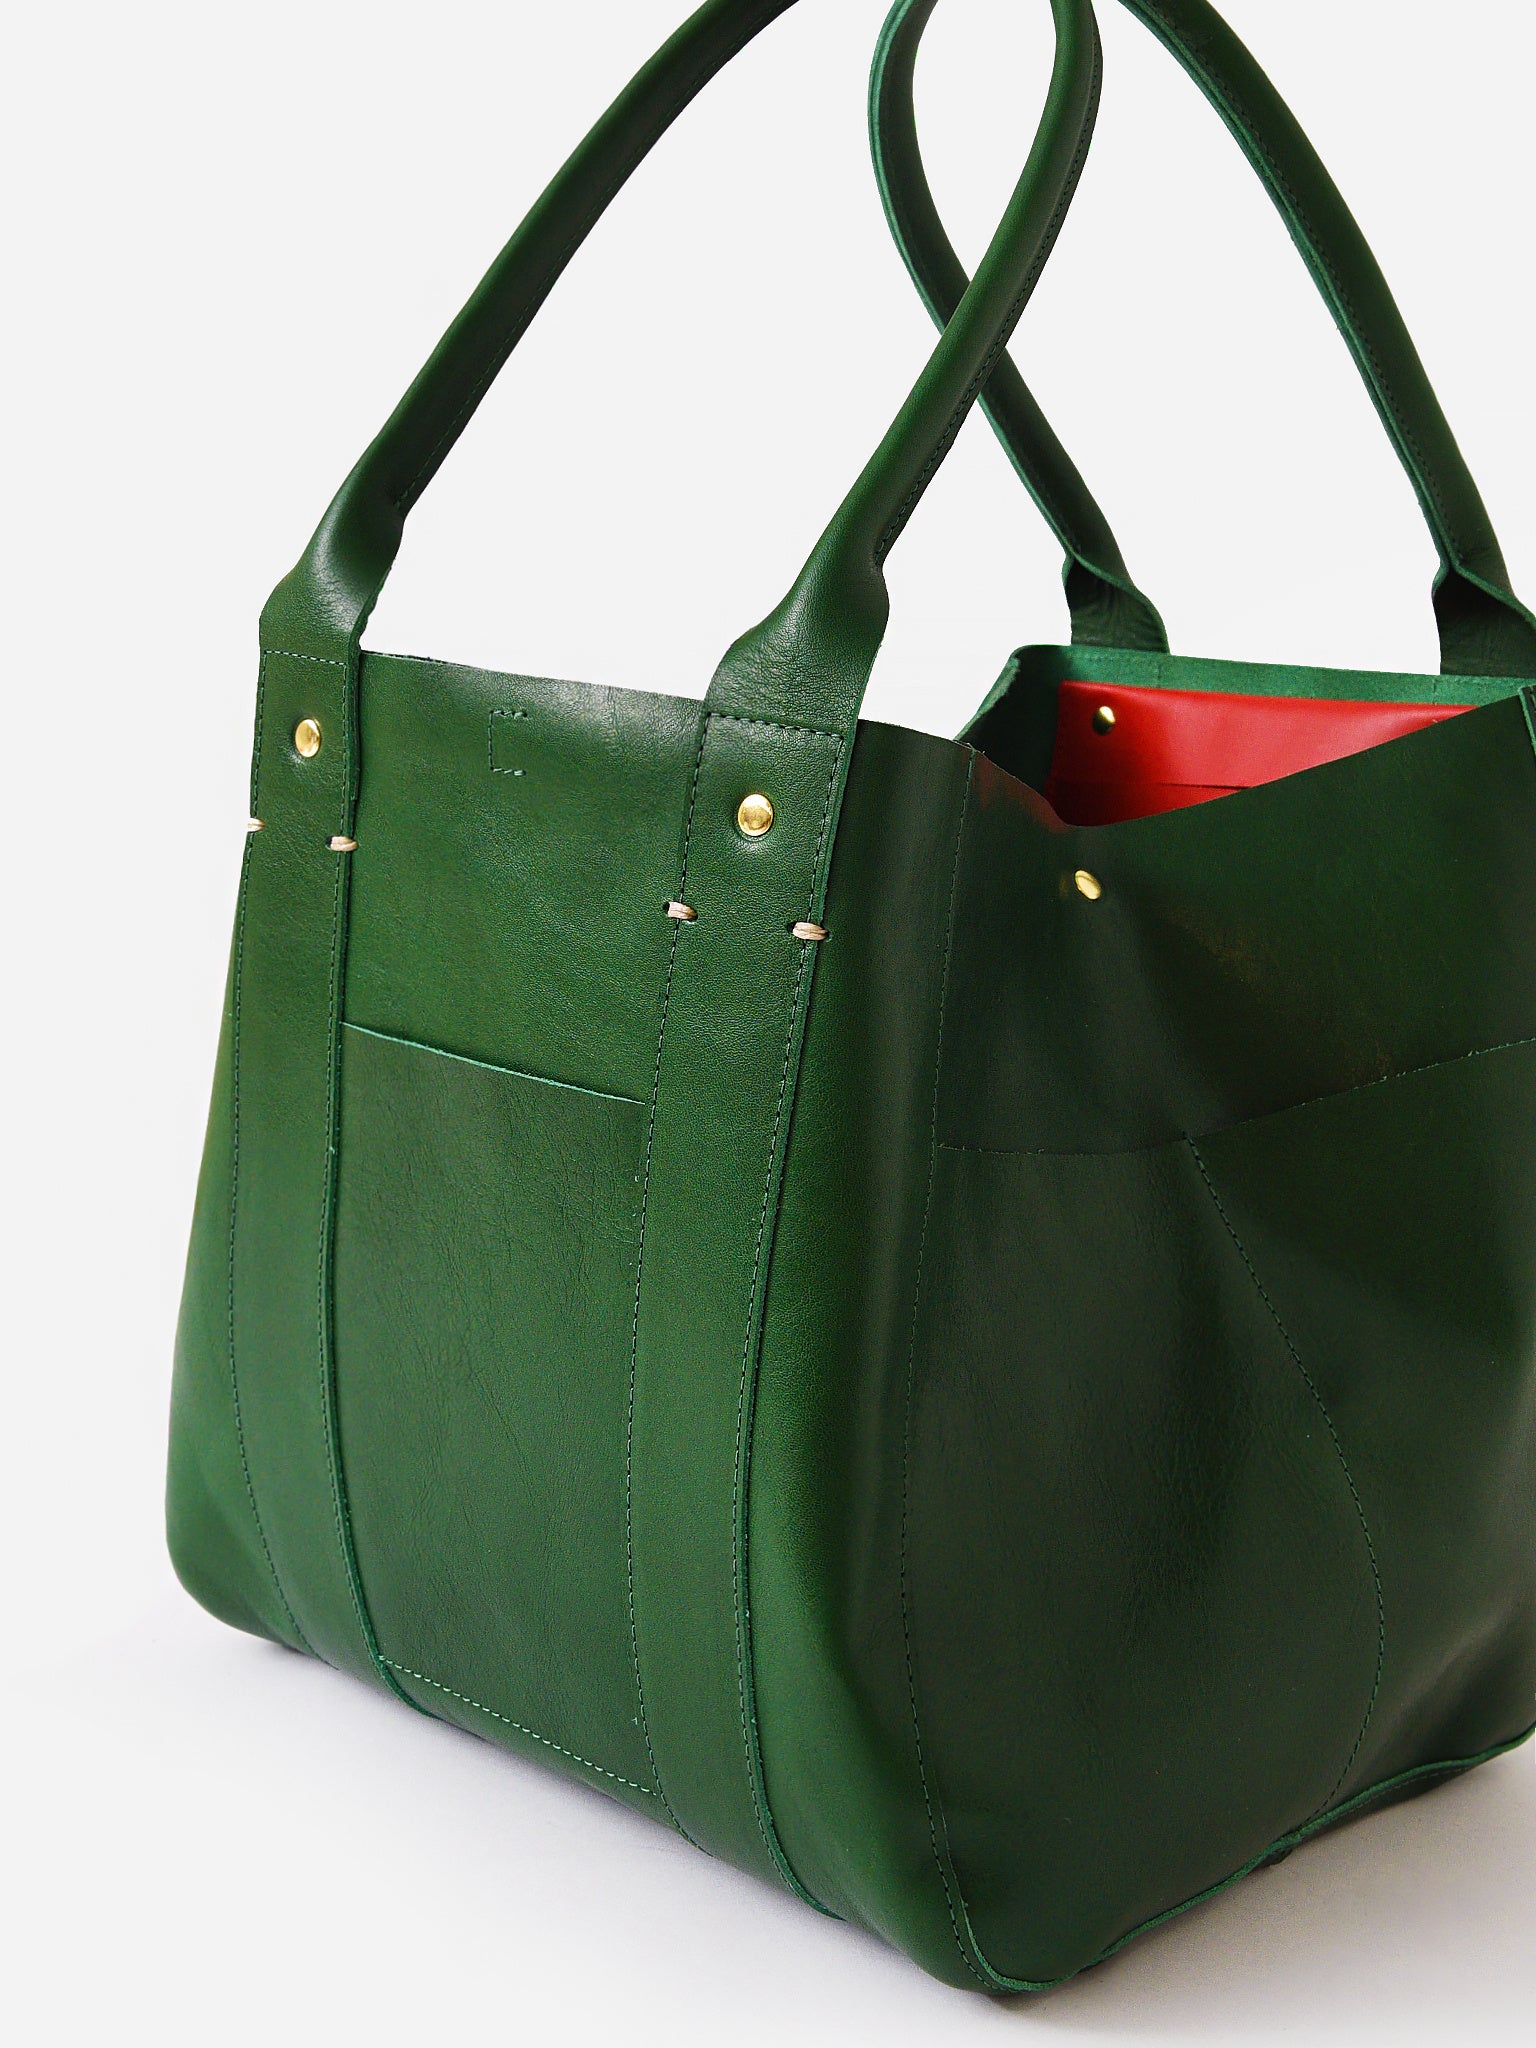 Clare V. | Le Box Tote in Cuoio Perf by Clare V. | Bags Exclusive at The Shoe Hive